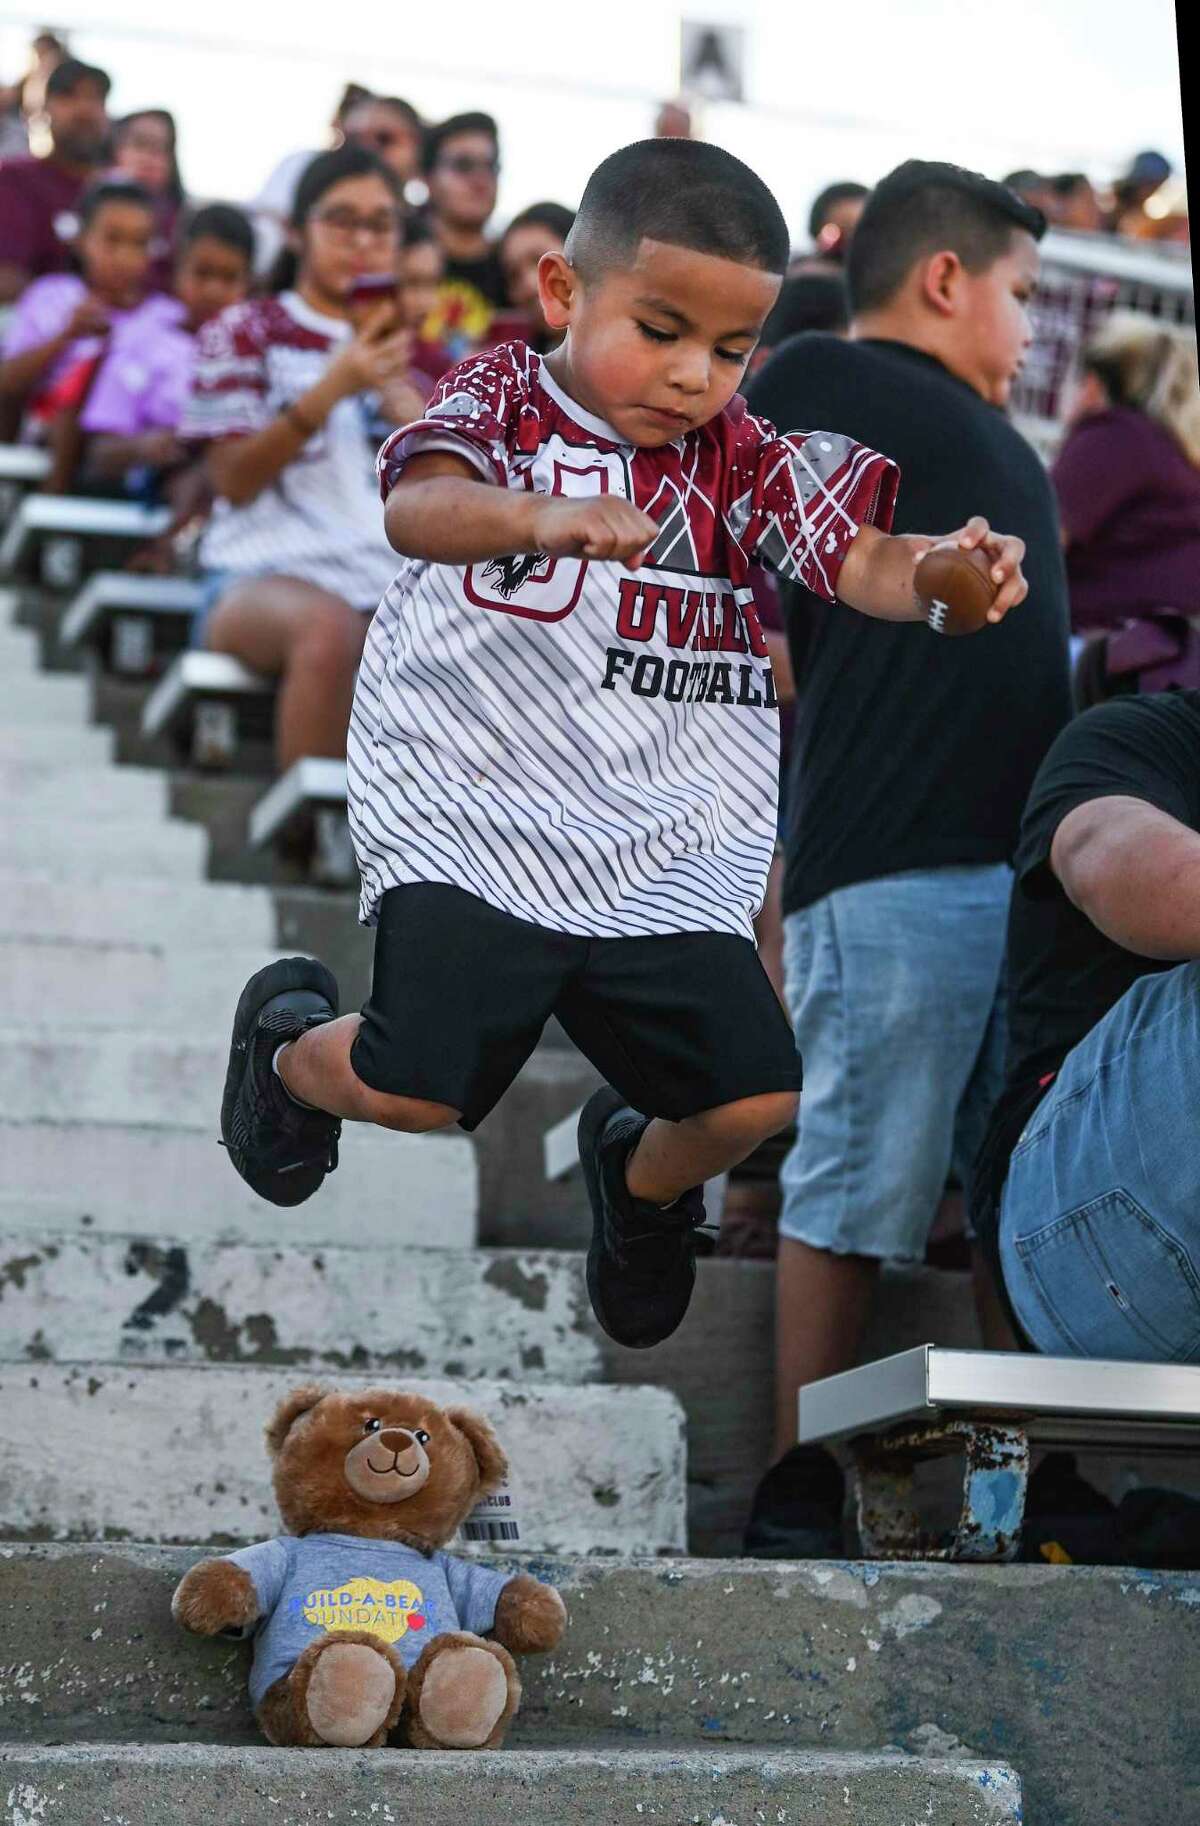 Angel Gonzalez, 4, plays with his plush bear in the stands at Honey Bowl Stadium in Uvalde, where the Uvalde Coyotes played their first home game of the football season on Friday night, Sept. 2, 2022, just over three months after 22 students and teachers were gunned down at Robb Elementary School in Uvalde. Uvalde won the game over Eagle Pass Winn, 34-28.